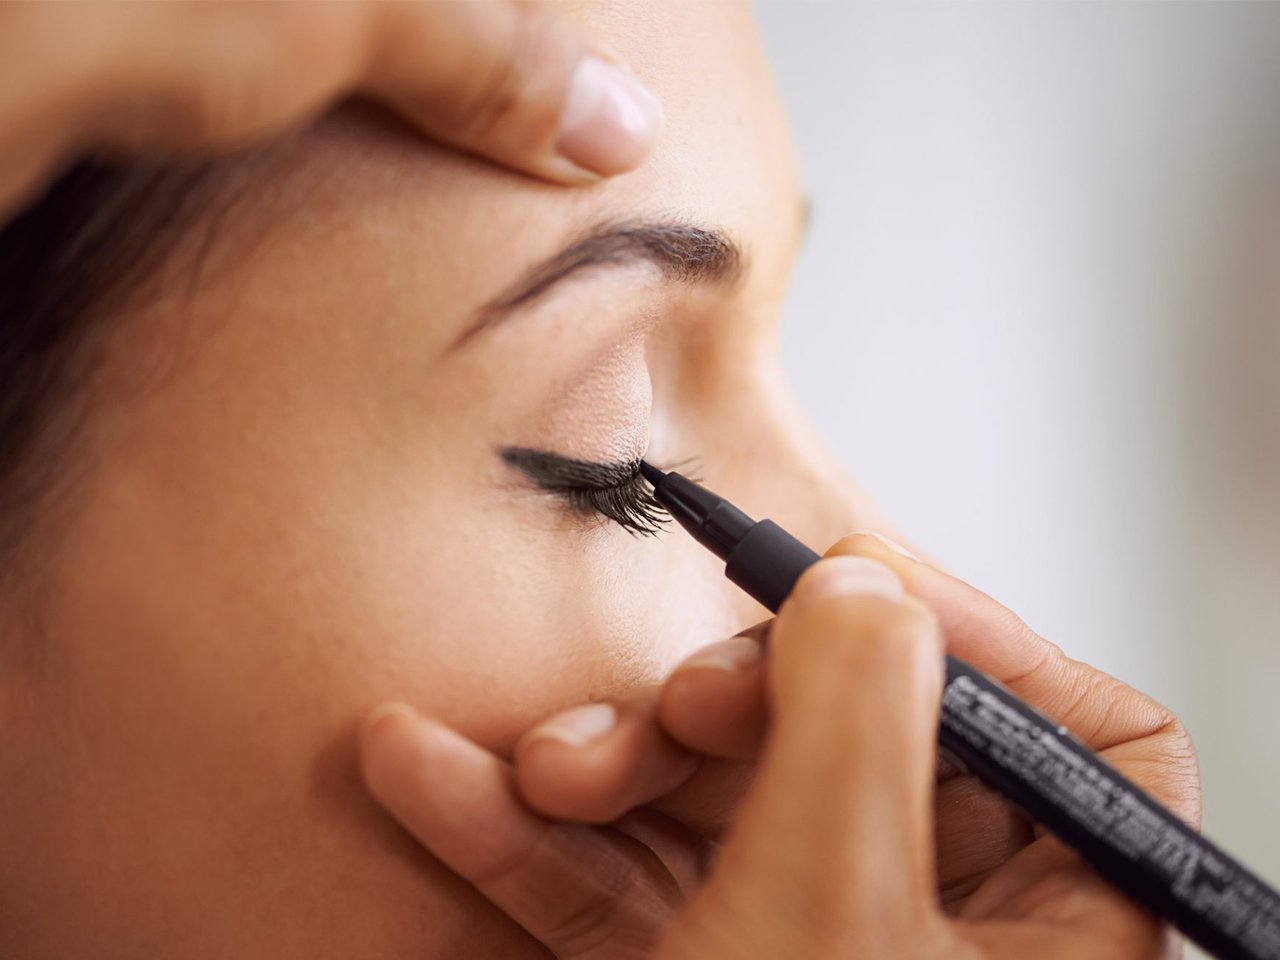 A woman applies liquid eyeliner to an eyelid for a piece on how to apply liquid eyeliner.